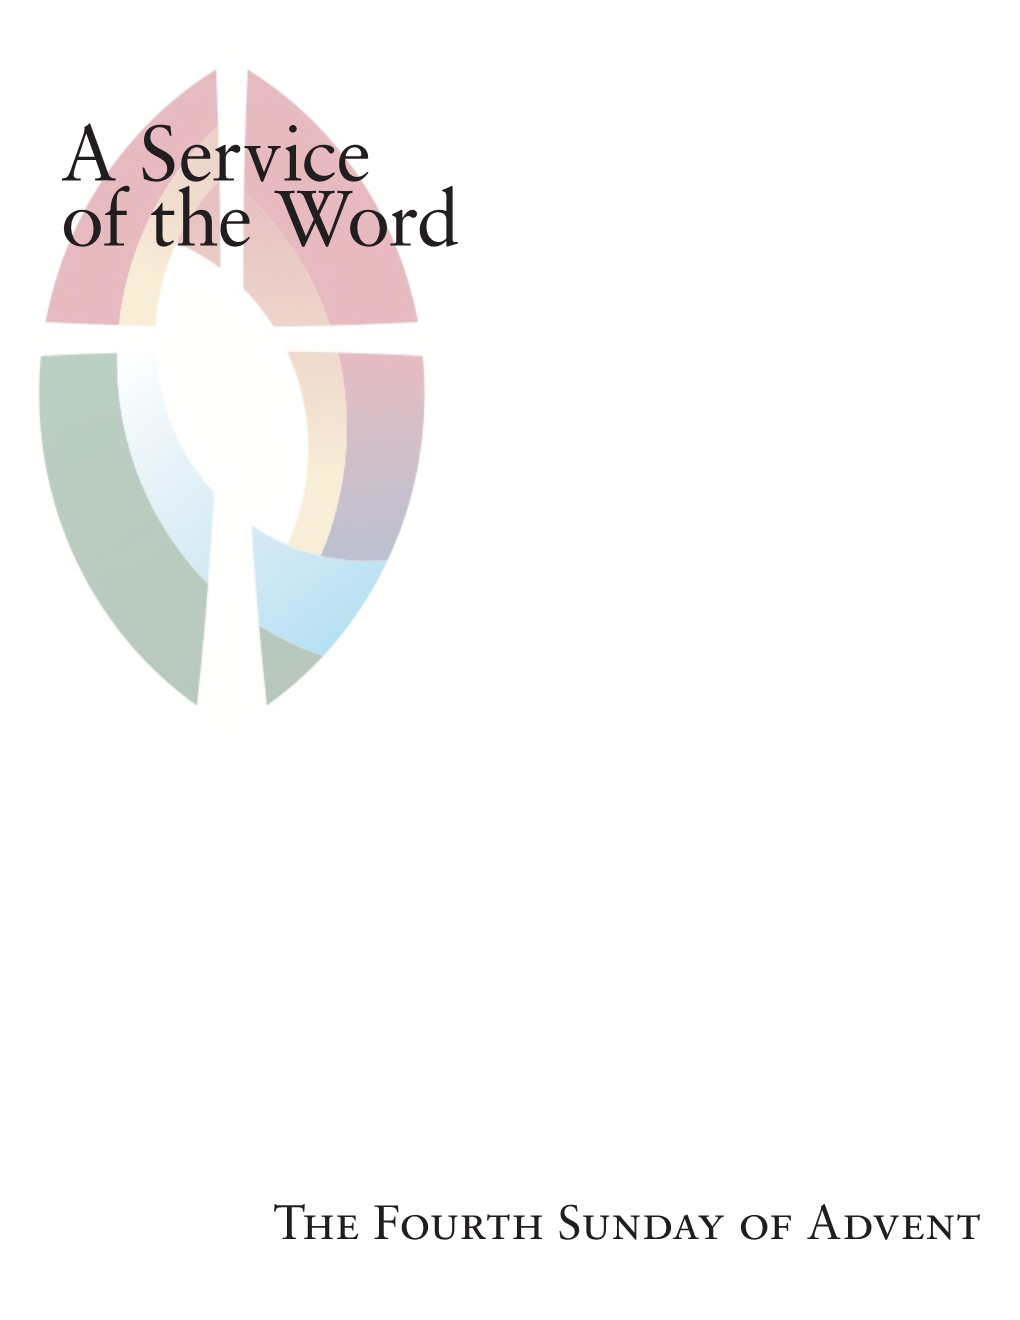 A Service of the Word